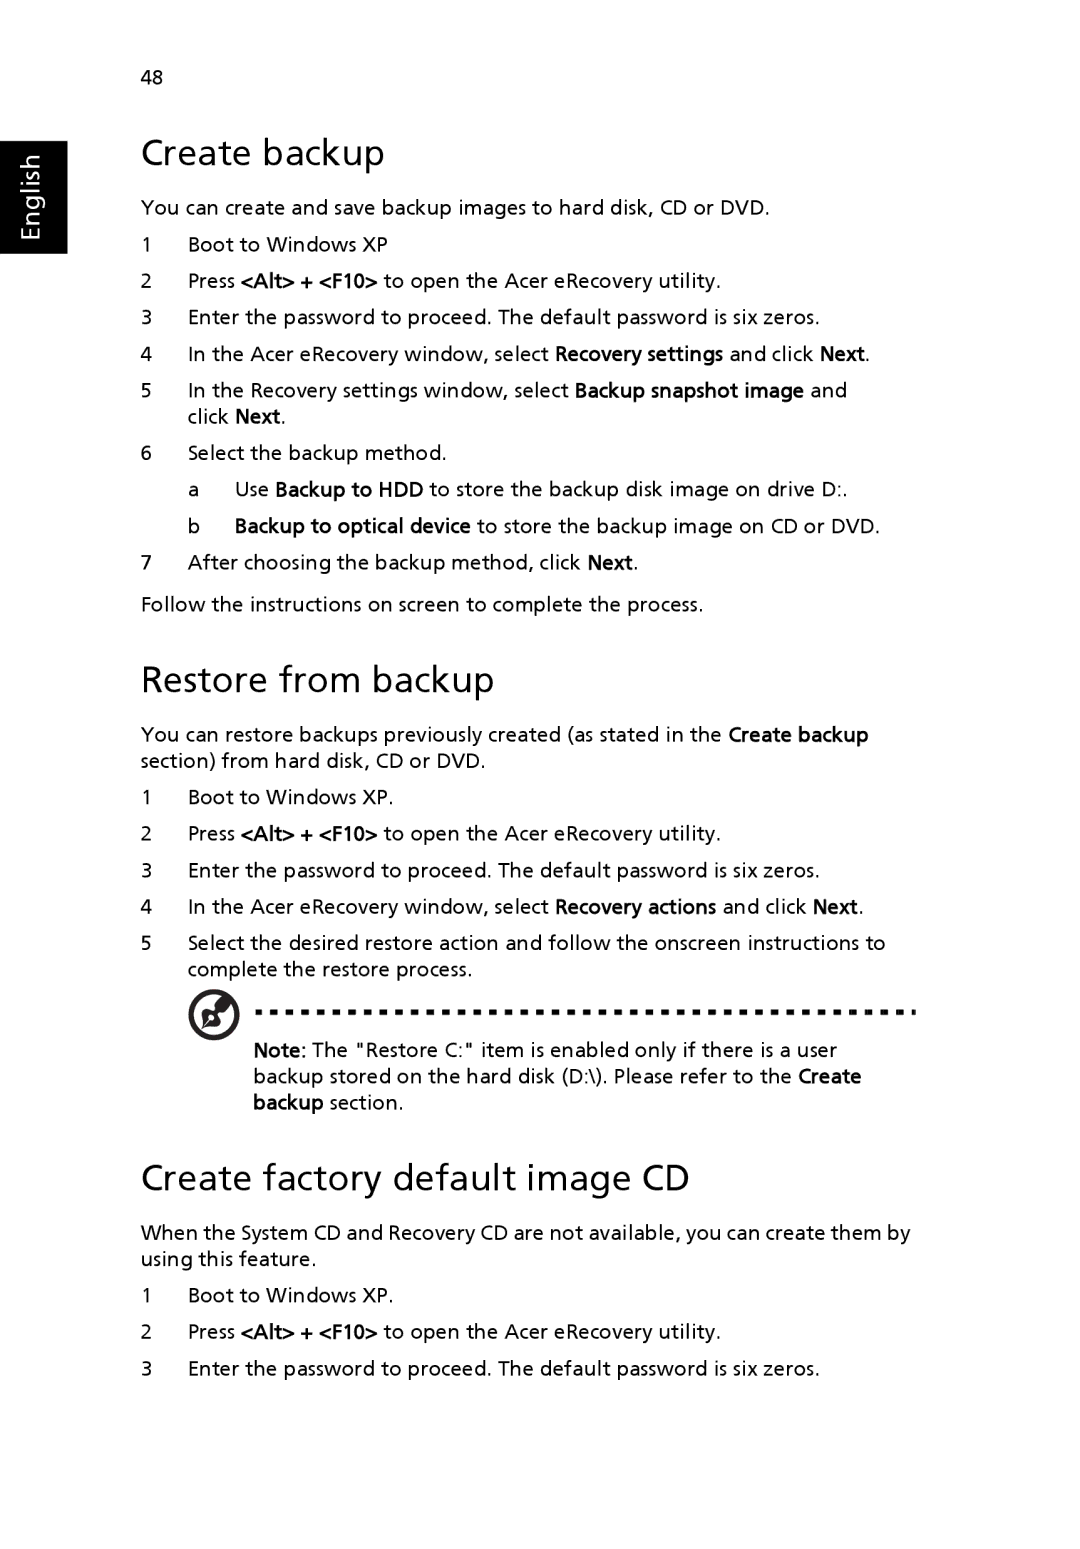 Acer 3610 Series manual Create backup, Restore from backup, Create factory default image CD 